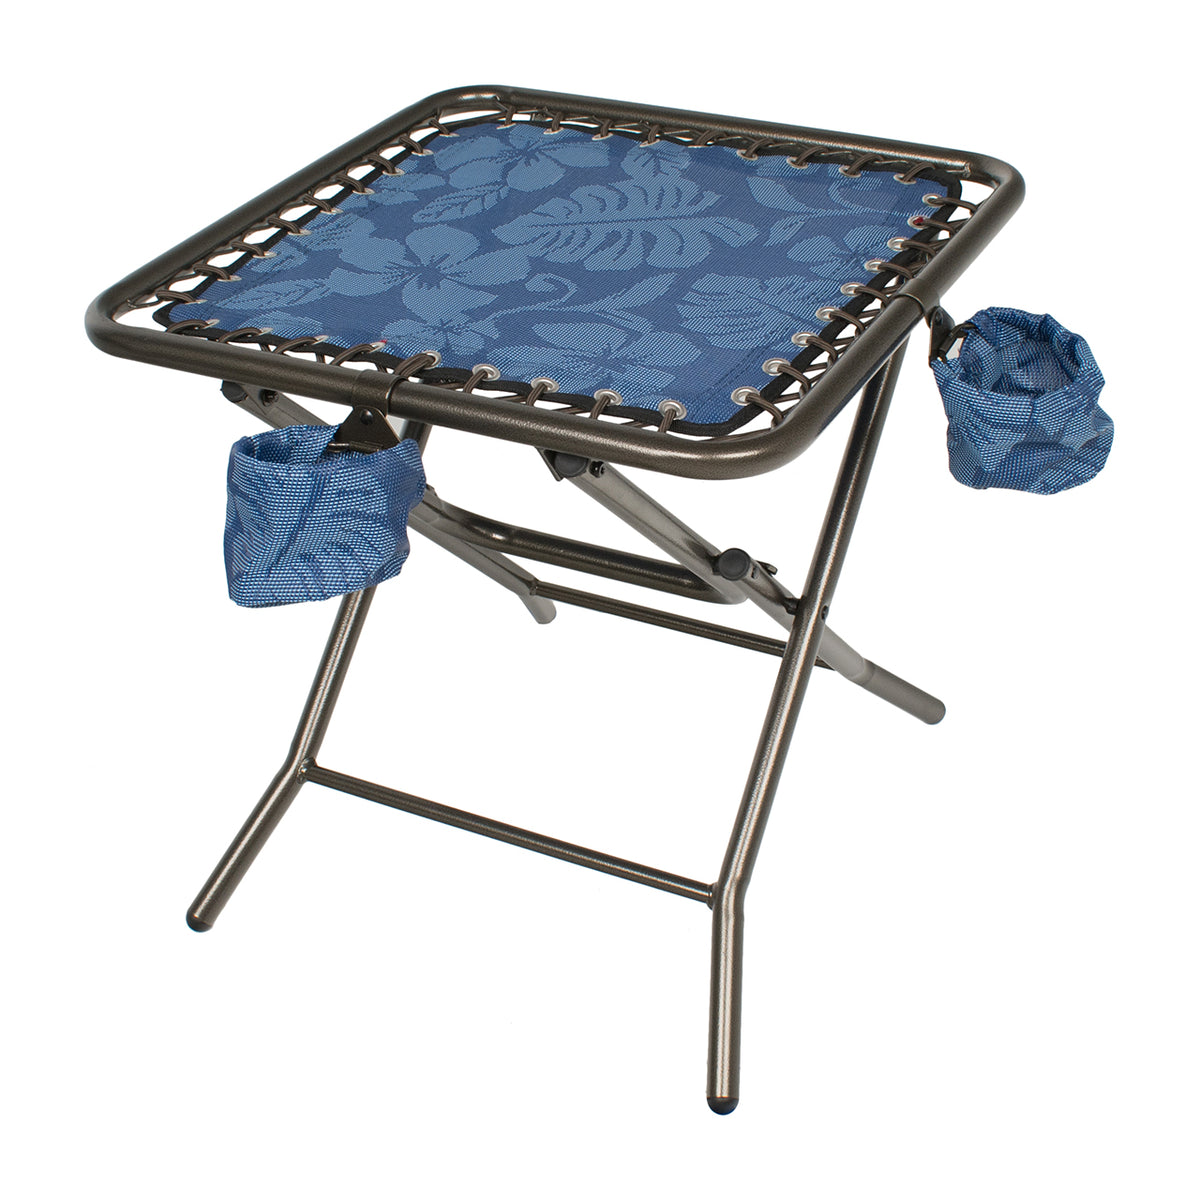 Bliss Hammocks 20-inch Folding Side Table with 2 Detachable Cup Holders with a blue flower pattern.